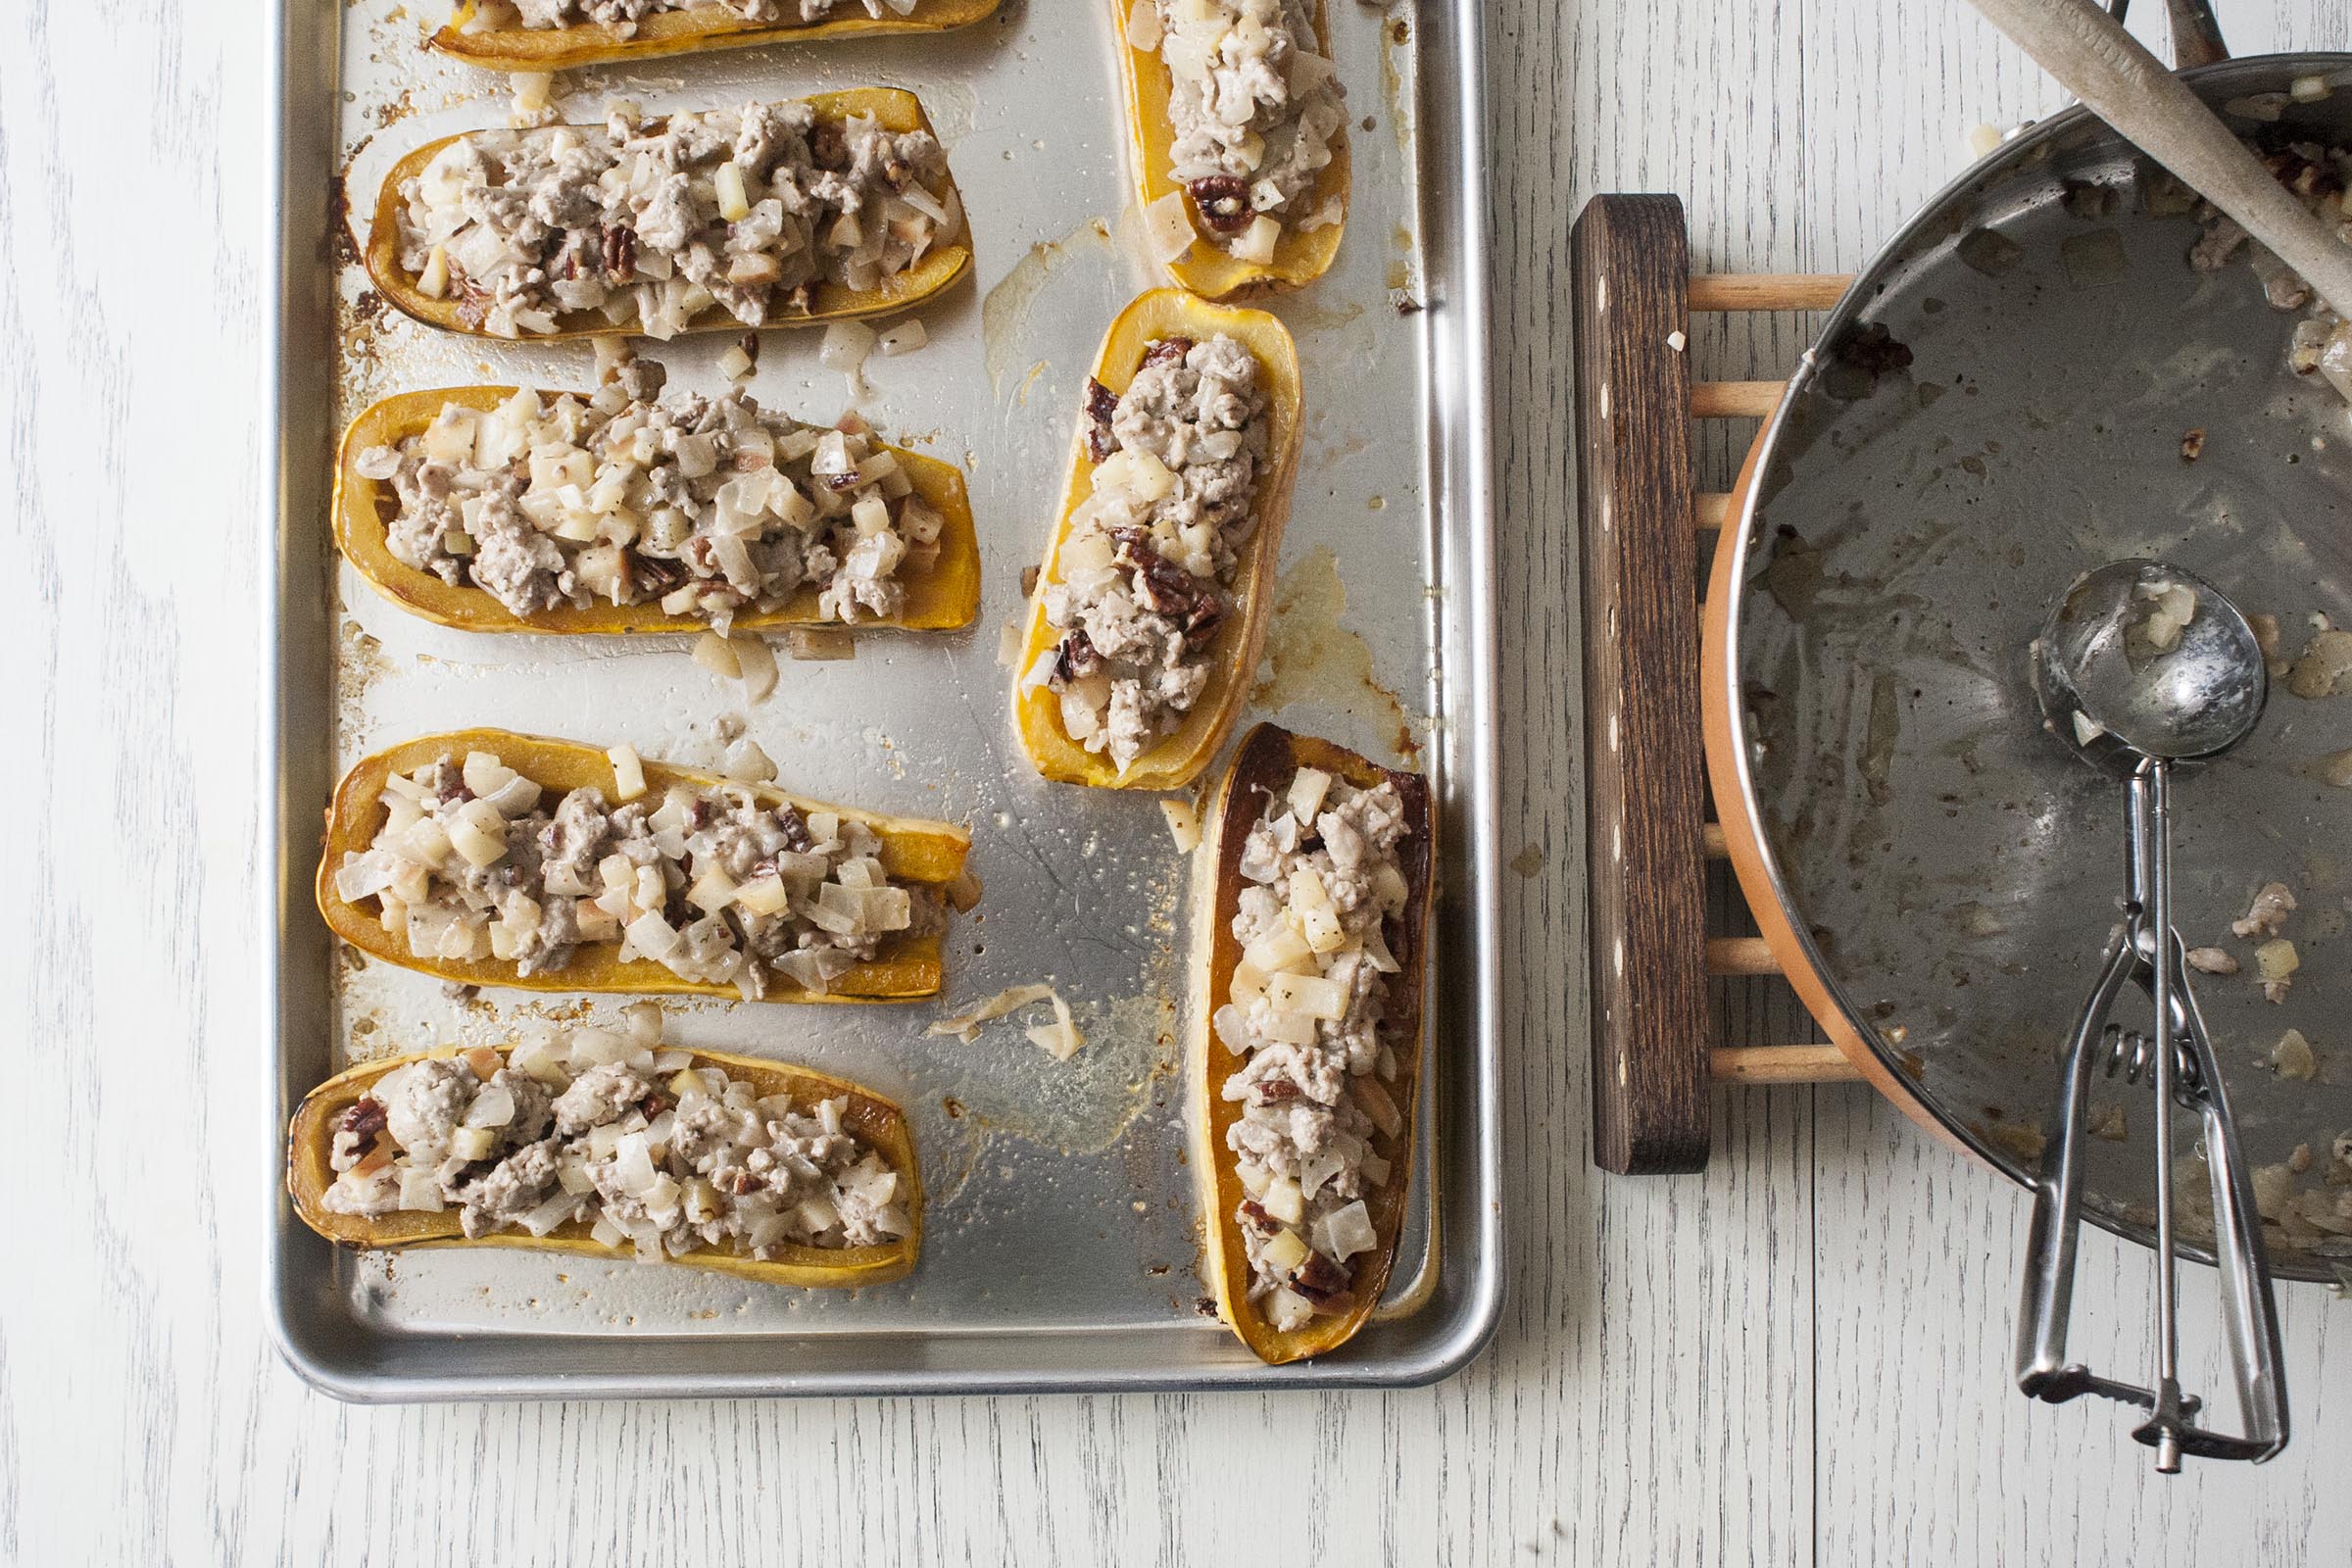 These delicata squash have been halved, roasted and stuffed with a filling of ground turkey, apples and pecans.